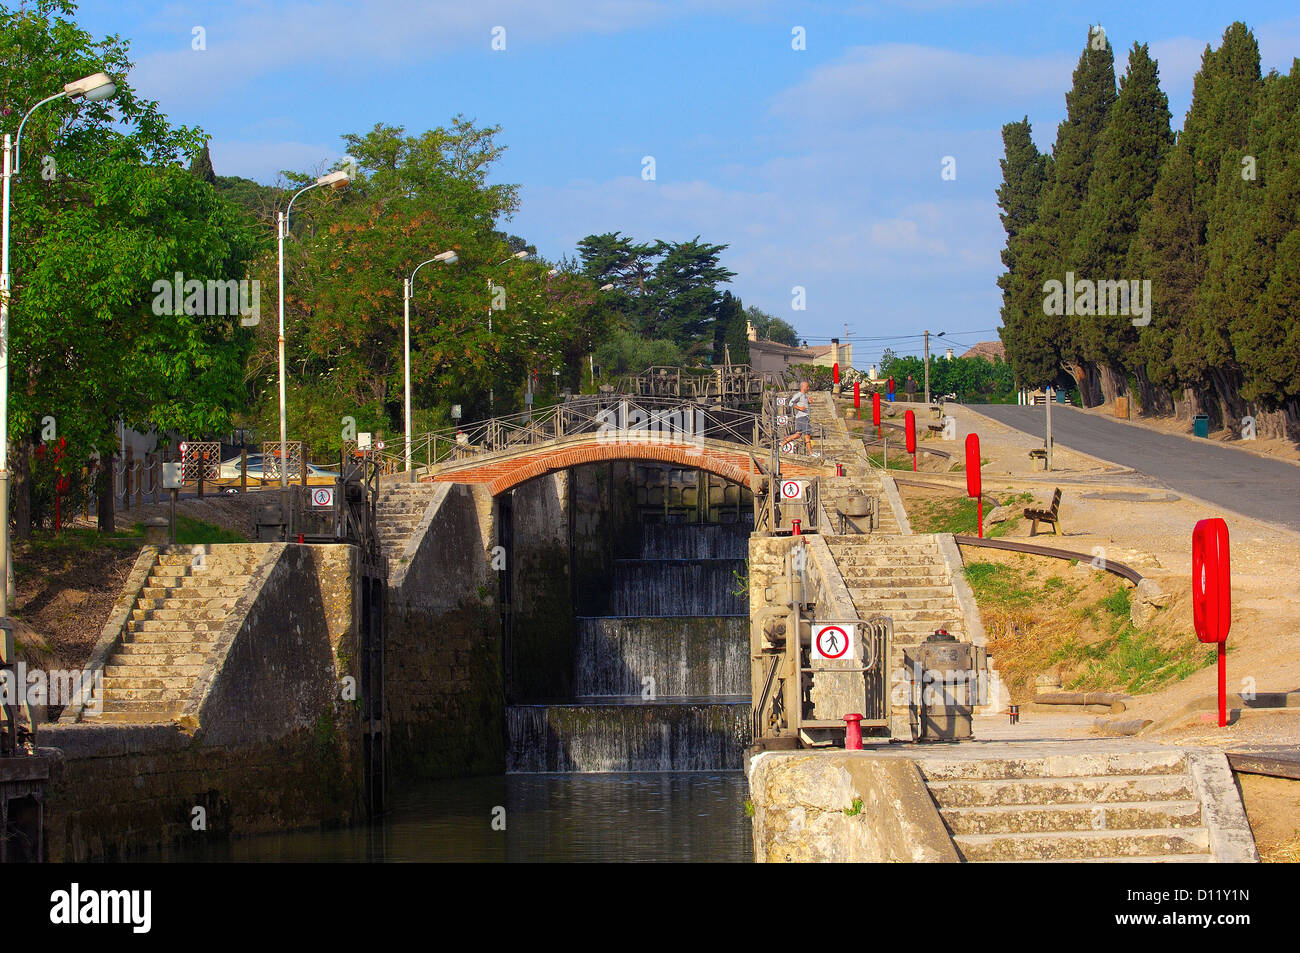 Beziers, Neuf Ecluses, il Canal du Midi, Herault, Languedoc-Roussillon, Francia, Europa Foto Stock